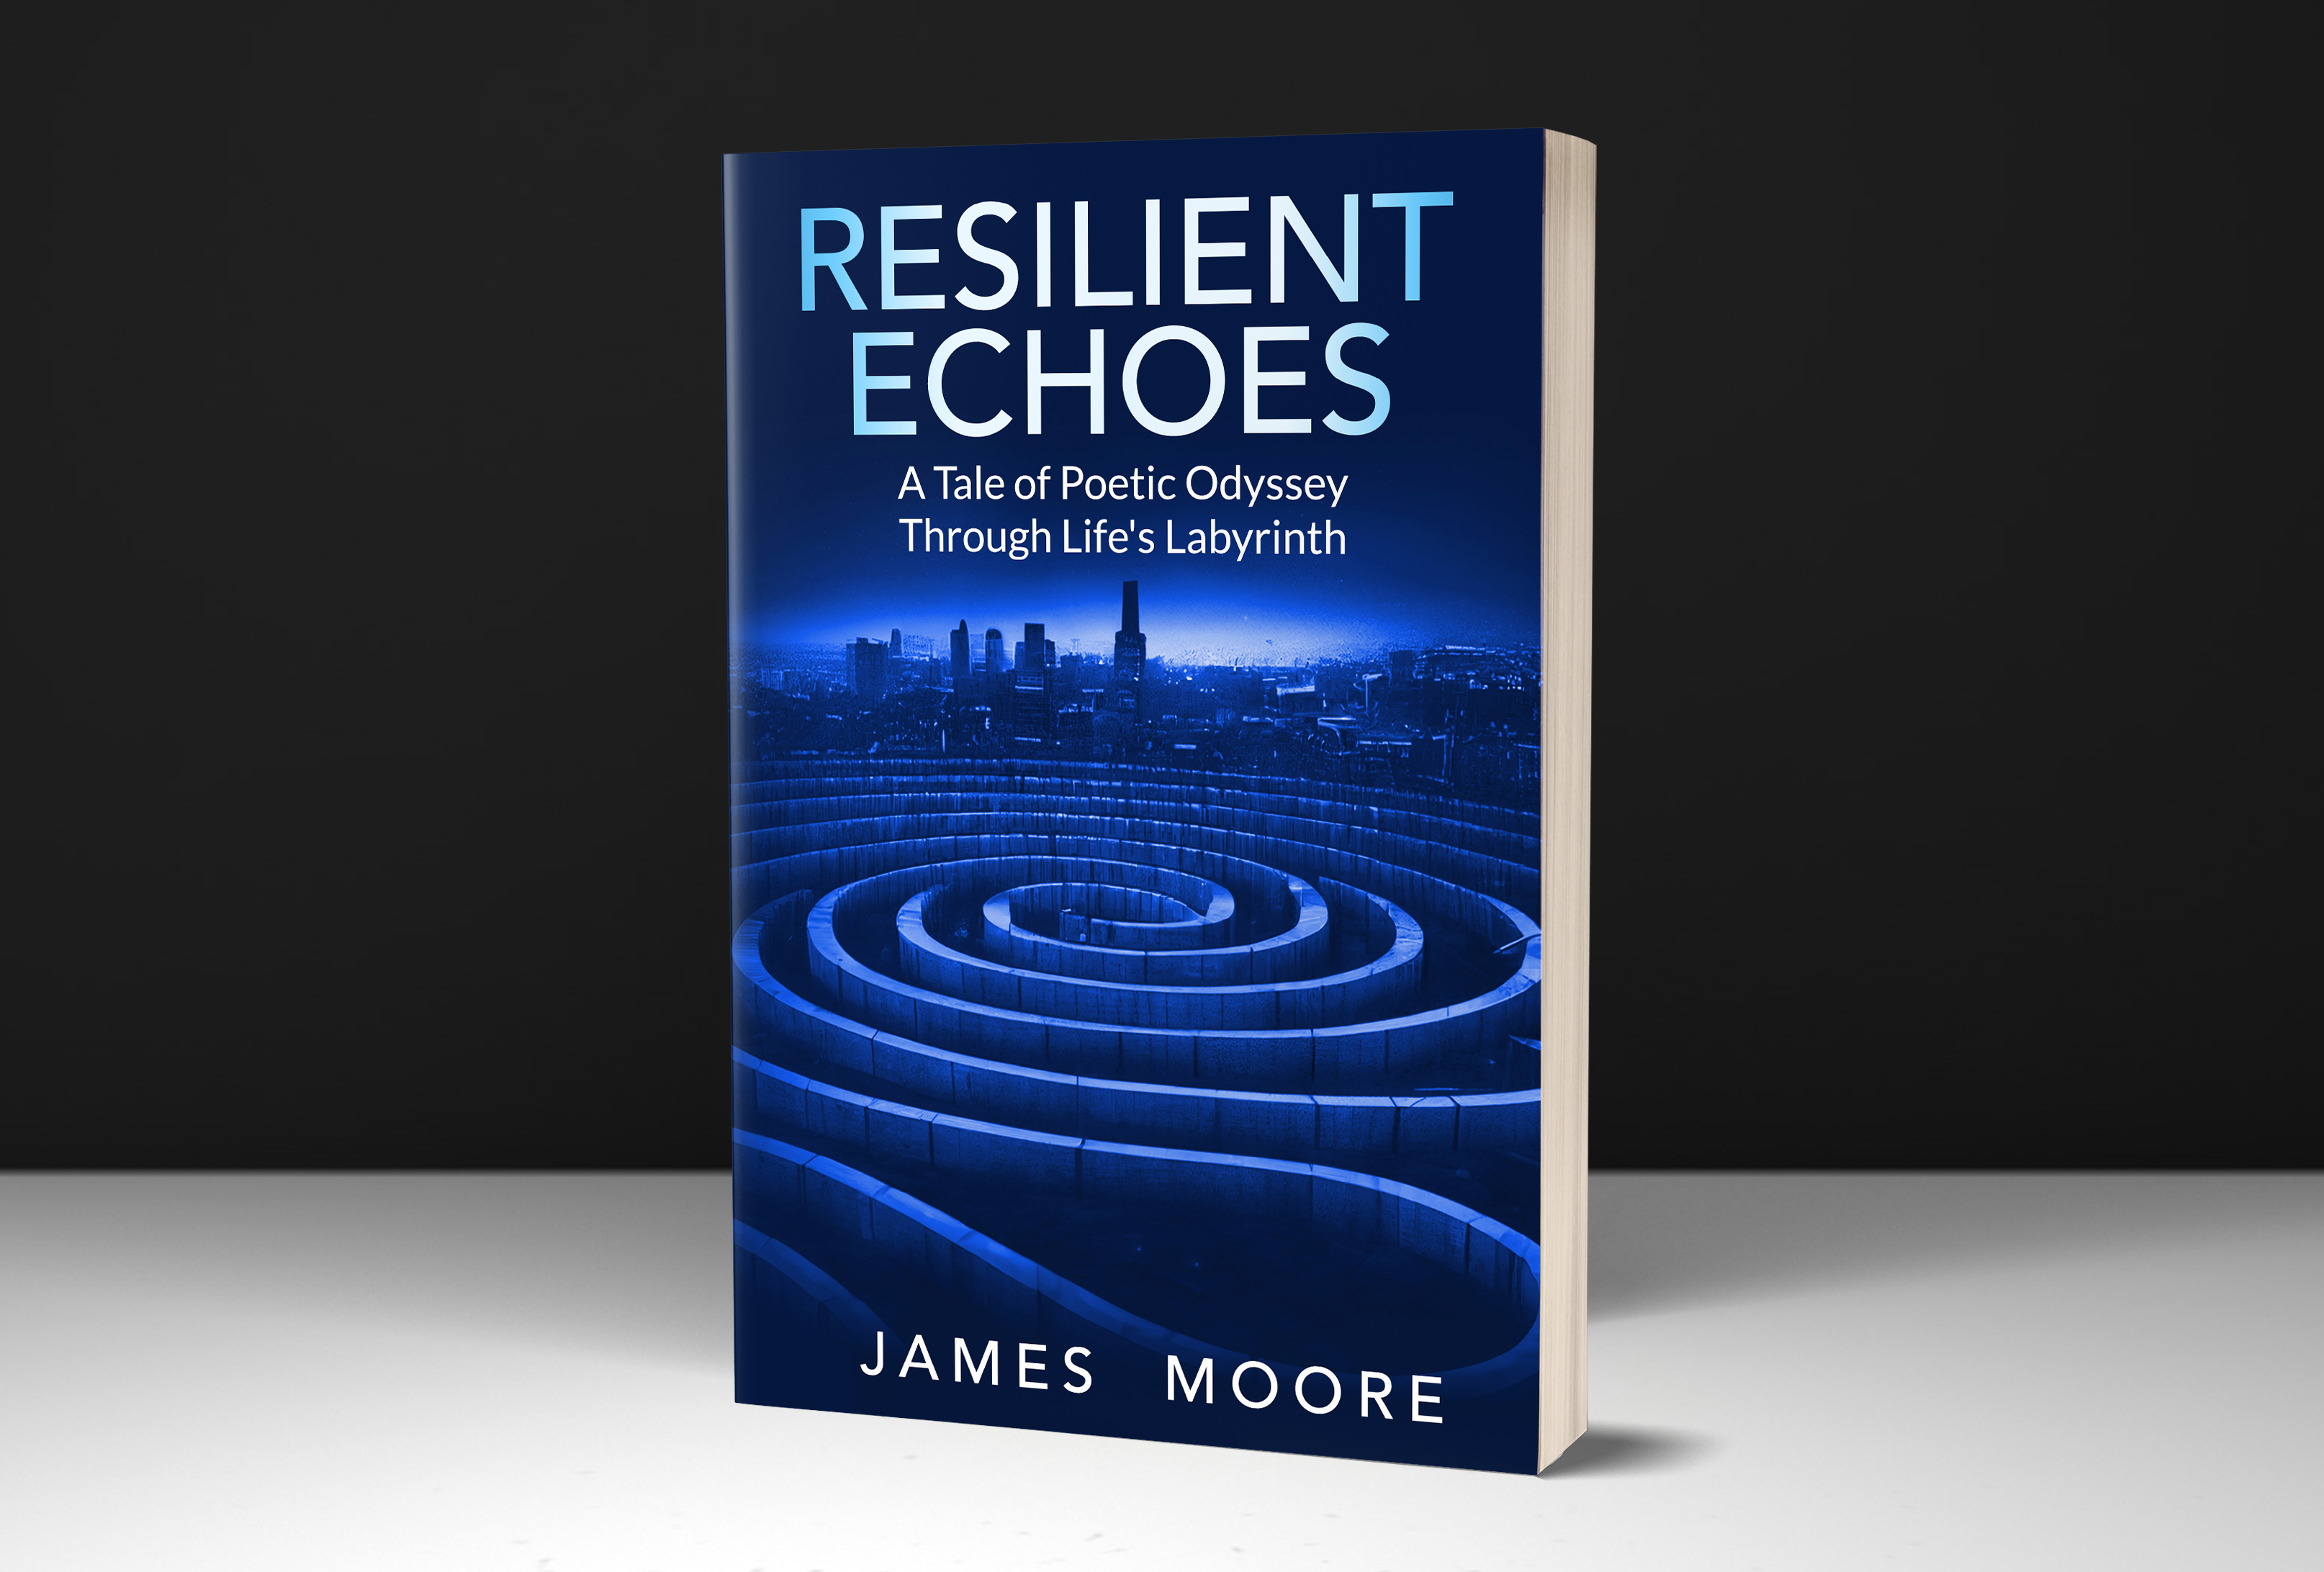 Introducing "Resilient Echoes: A Tale of Poetic Odyssey Through Life's Labyrinth" by James Moore - A Profound Literary Journey Unveiled